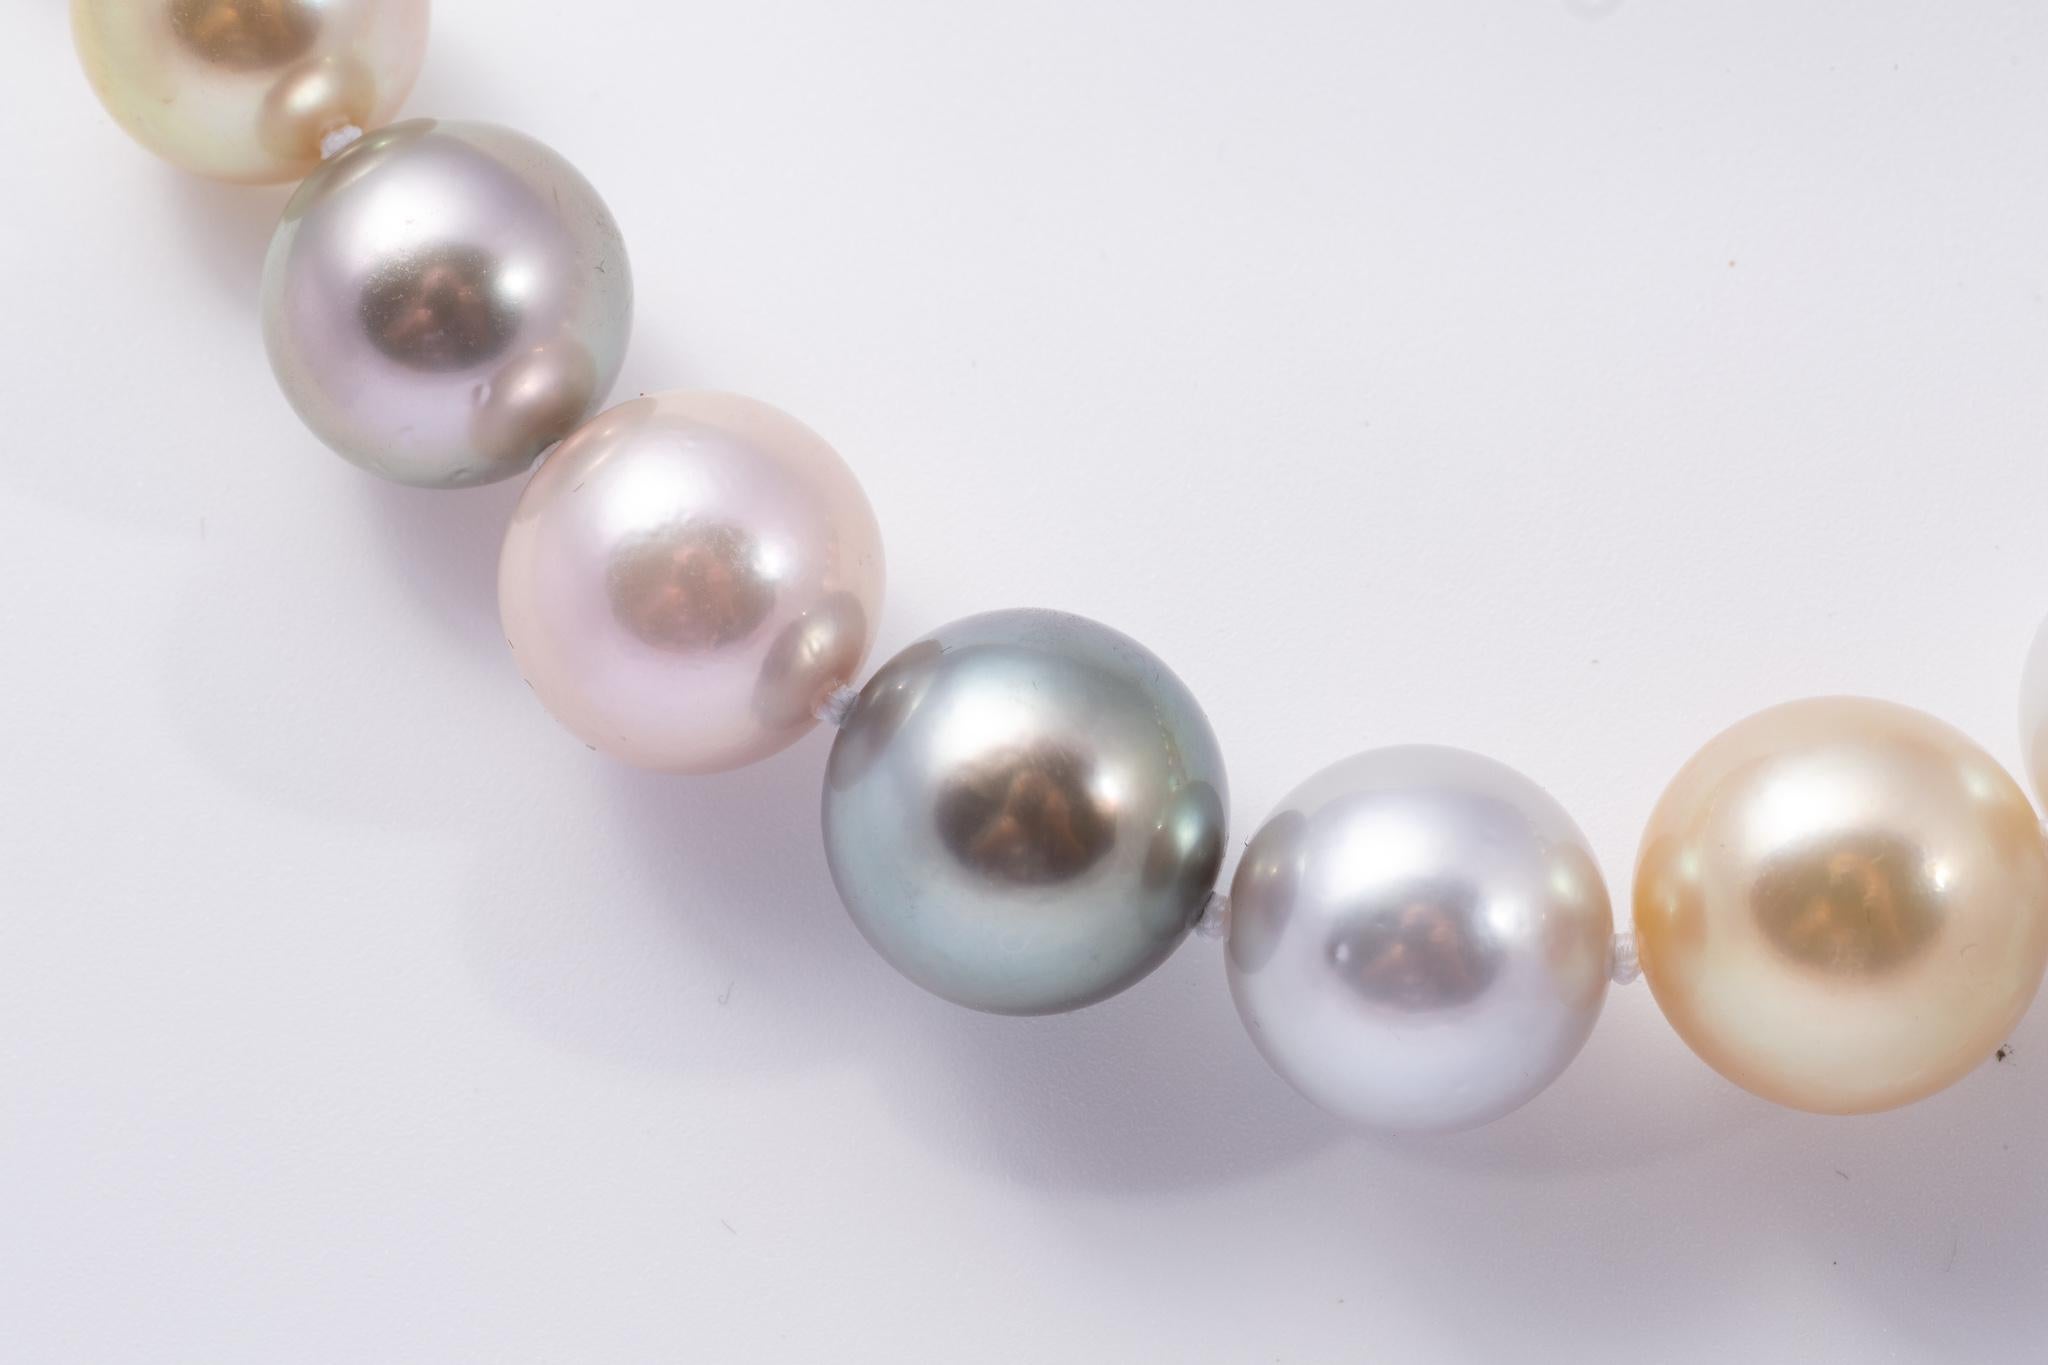 Rare and spectacular multi color strand of cultured south sea pearls. There are 32 pearls that range in size from 15.00mm to 13.00mm. The colors are peacock green, pistachio green, golden, pink and white. All of the pearls are round with smooth